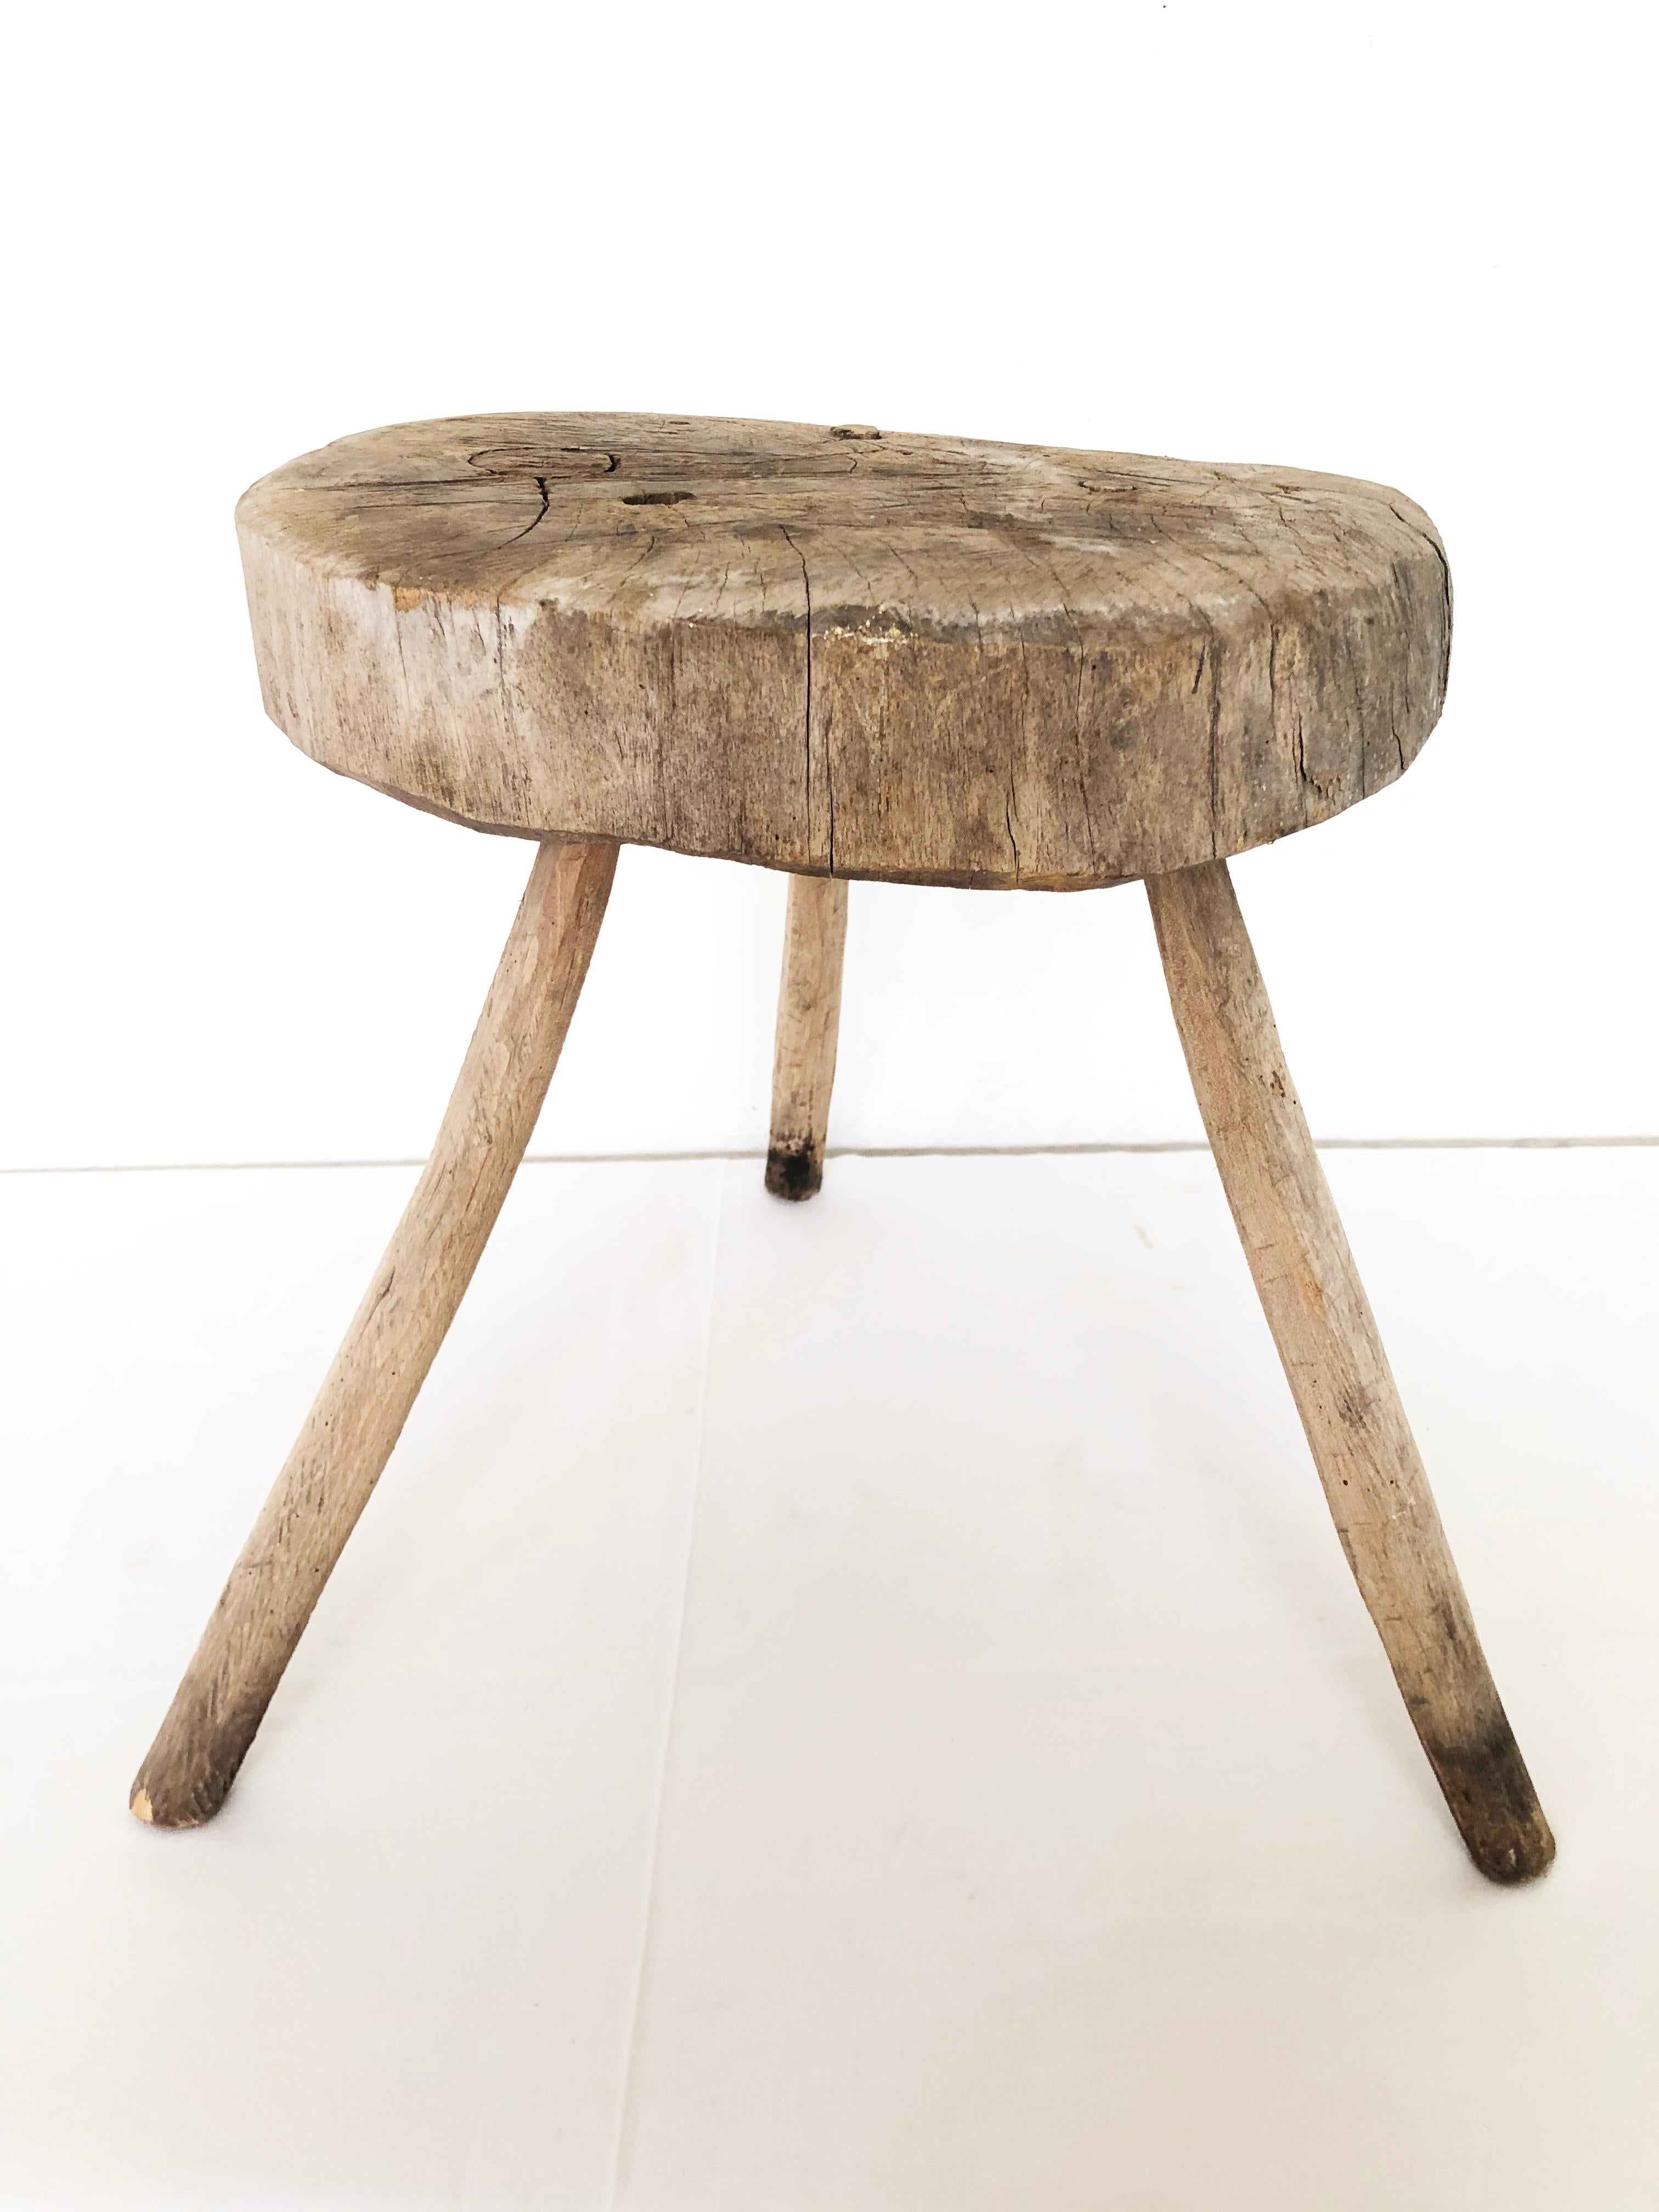 Mexican Late 19th Century Mezquite Milking Wood Stool with Thick Round Top